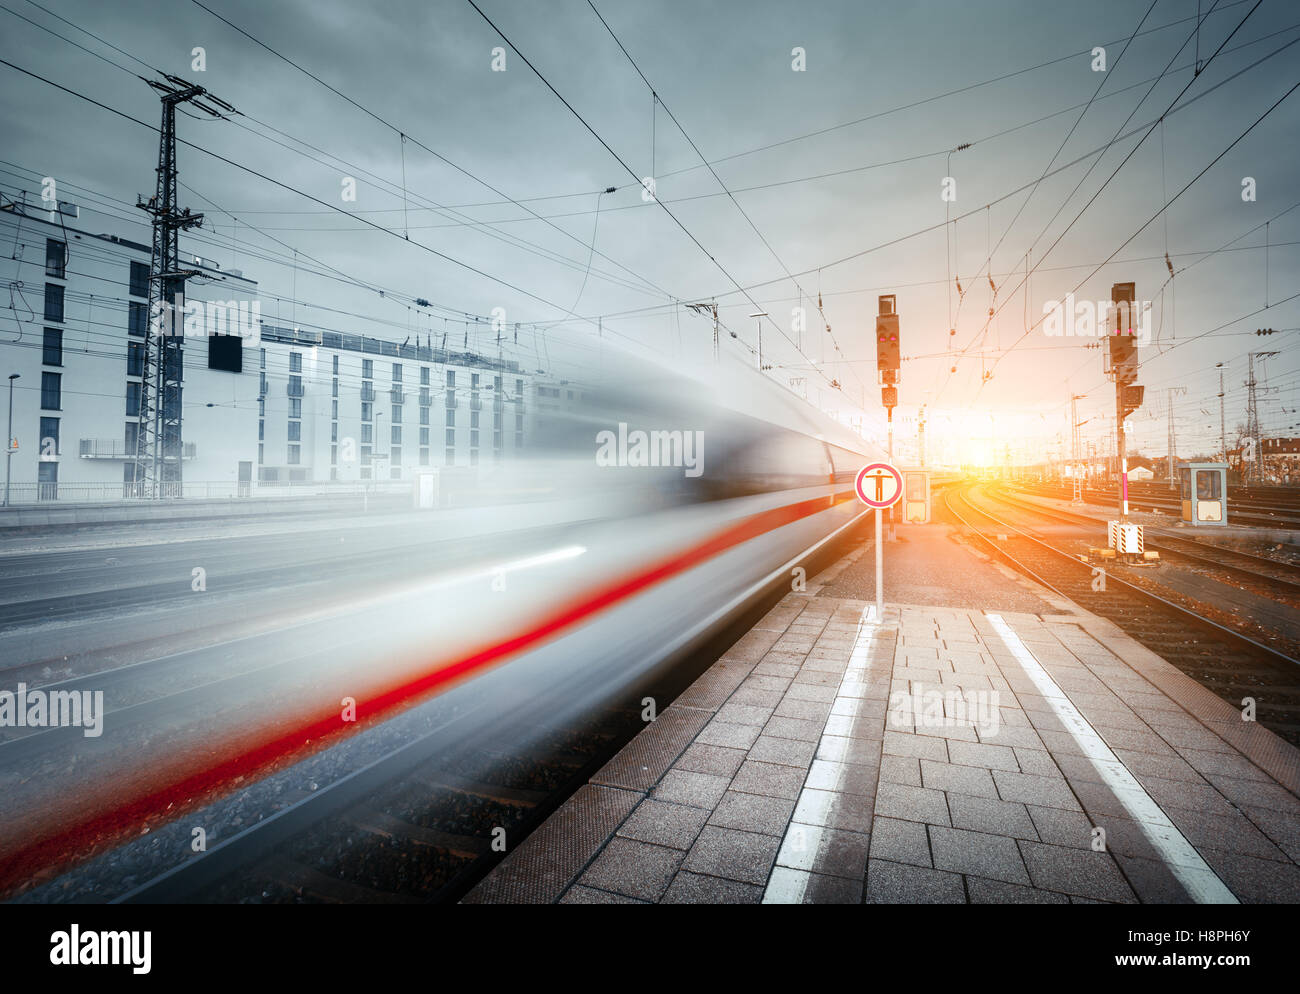 High speed passenger train on railroad track in motion at sunset. Blurred commuter train. Railway platform in the city. Railway Stock Photo